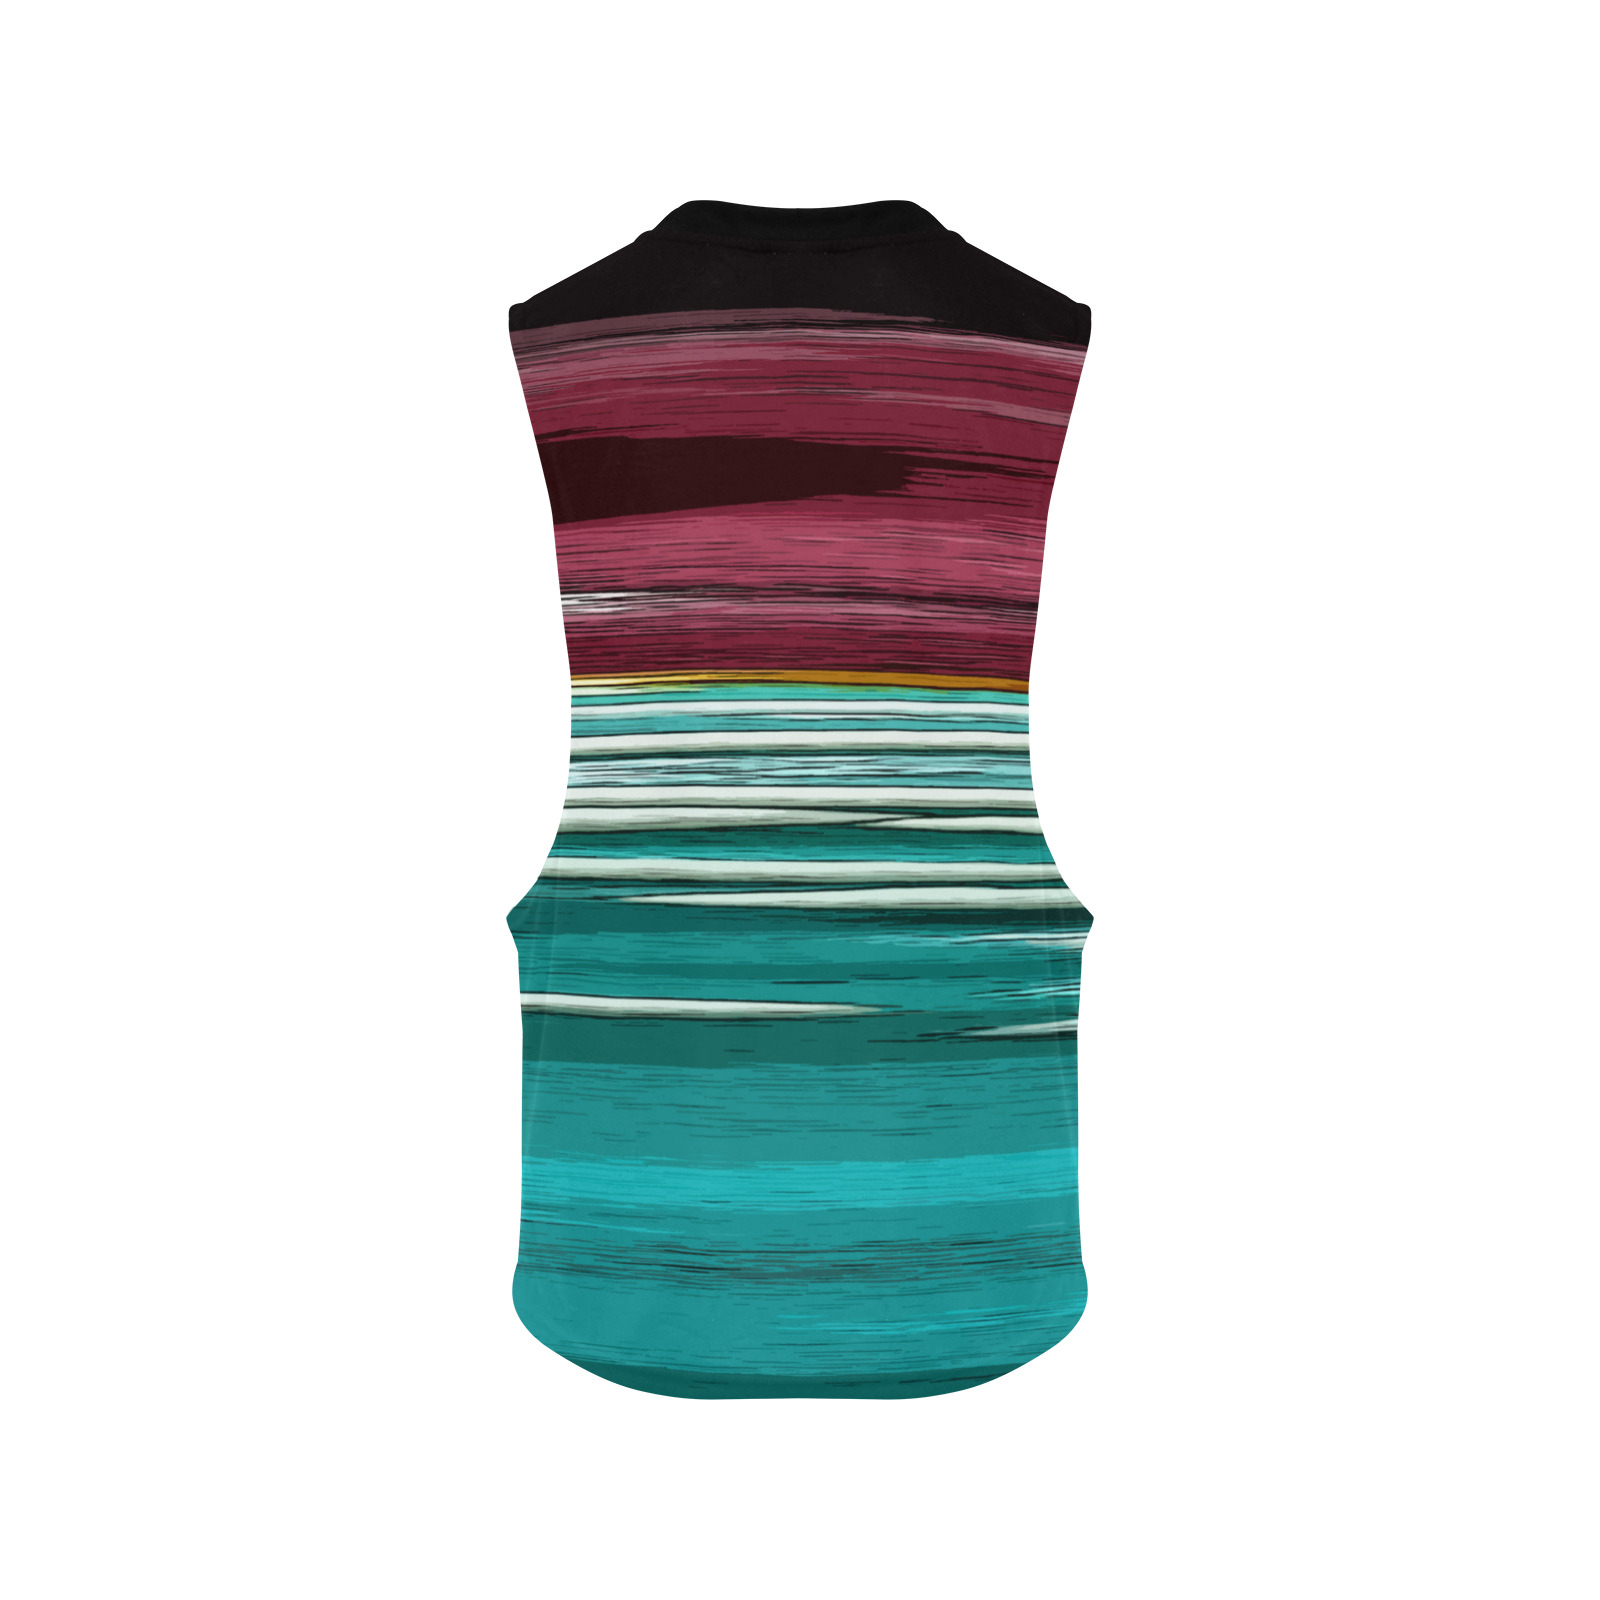 Abstract Red And Turquoise Horizontal Stripes Men's Open Sides Workout Tank Top (Model T72)